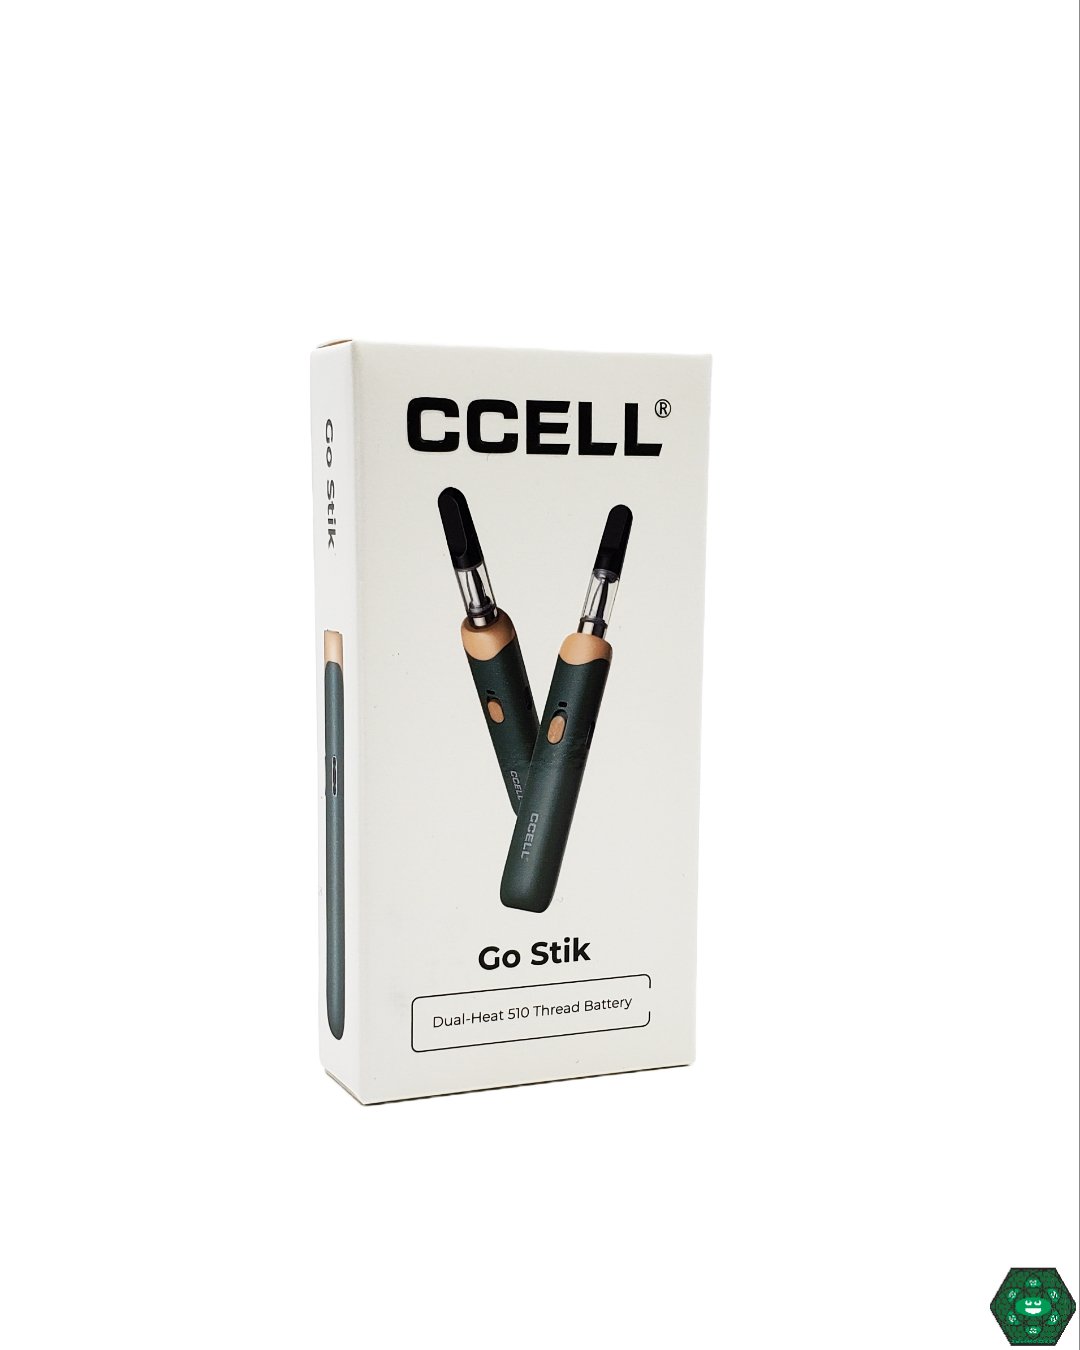 CCell Go Stik Cartridge Battery